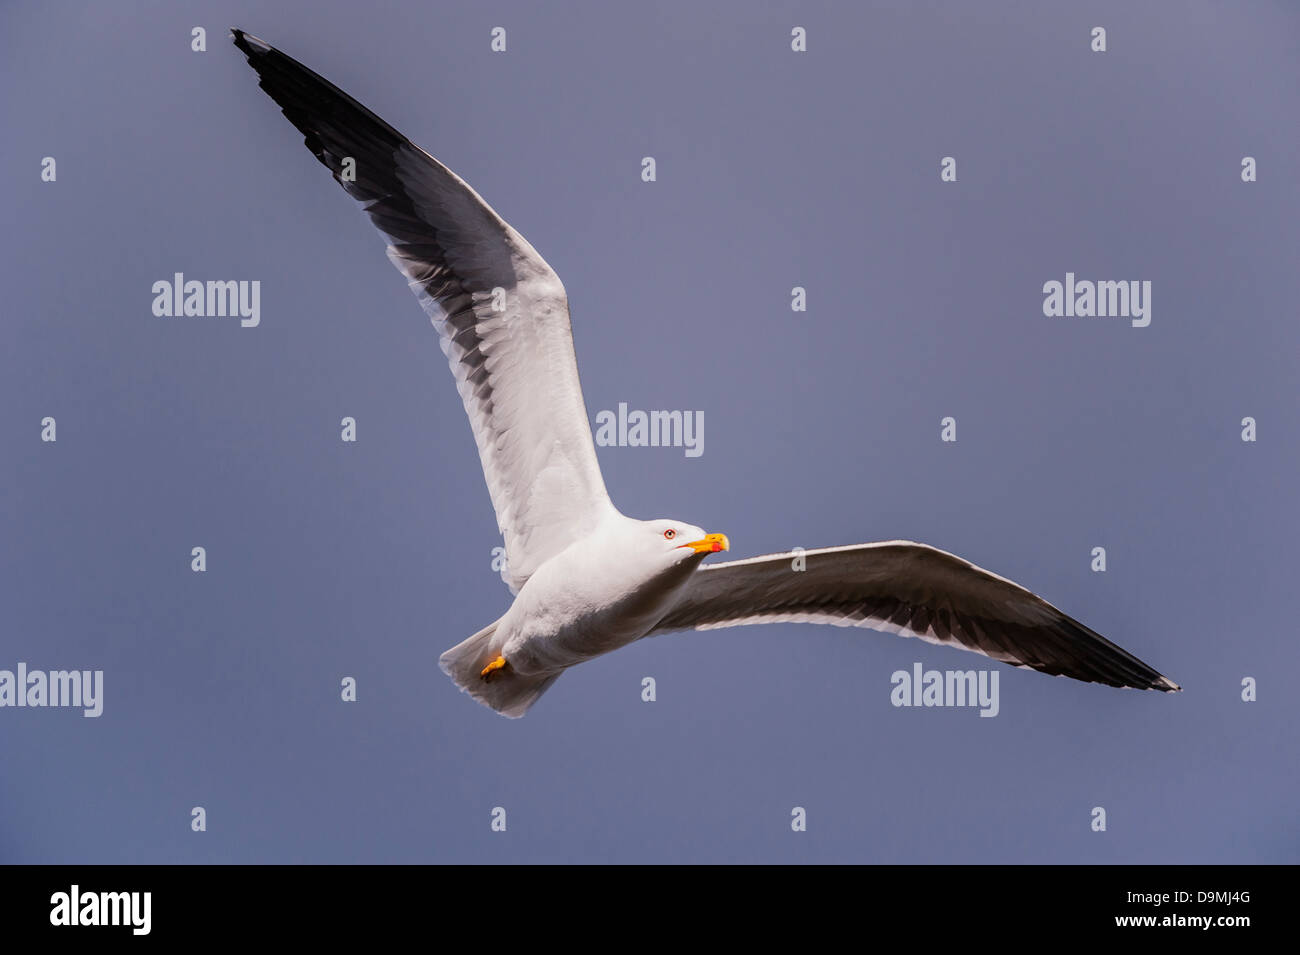 A Lesser black-backed gull (Larus fuscus) in flight in the Uk Stock Photo